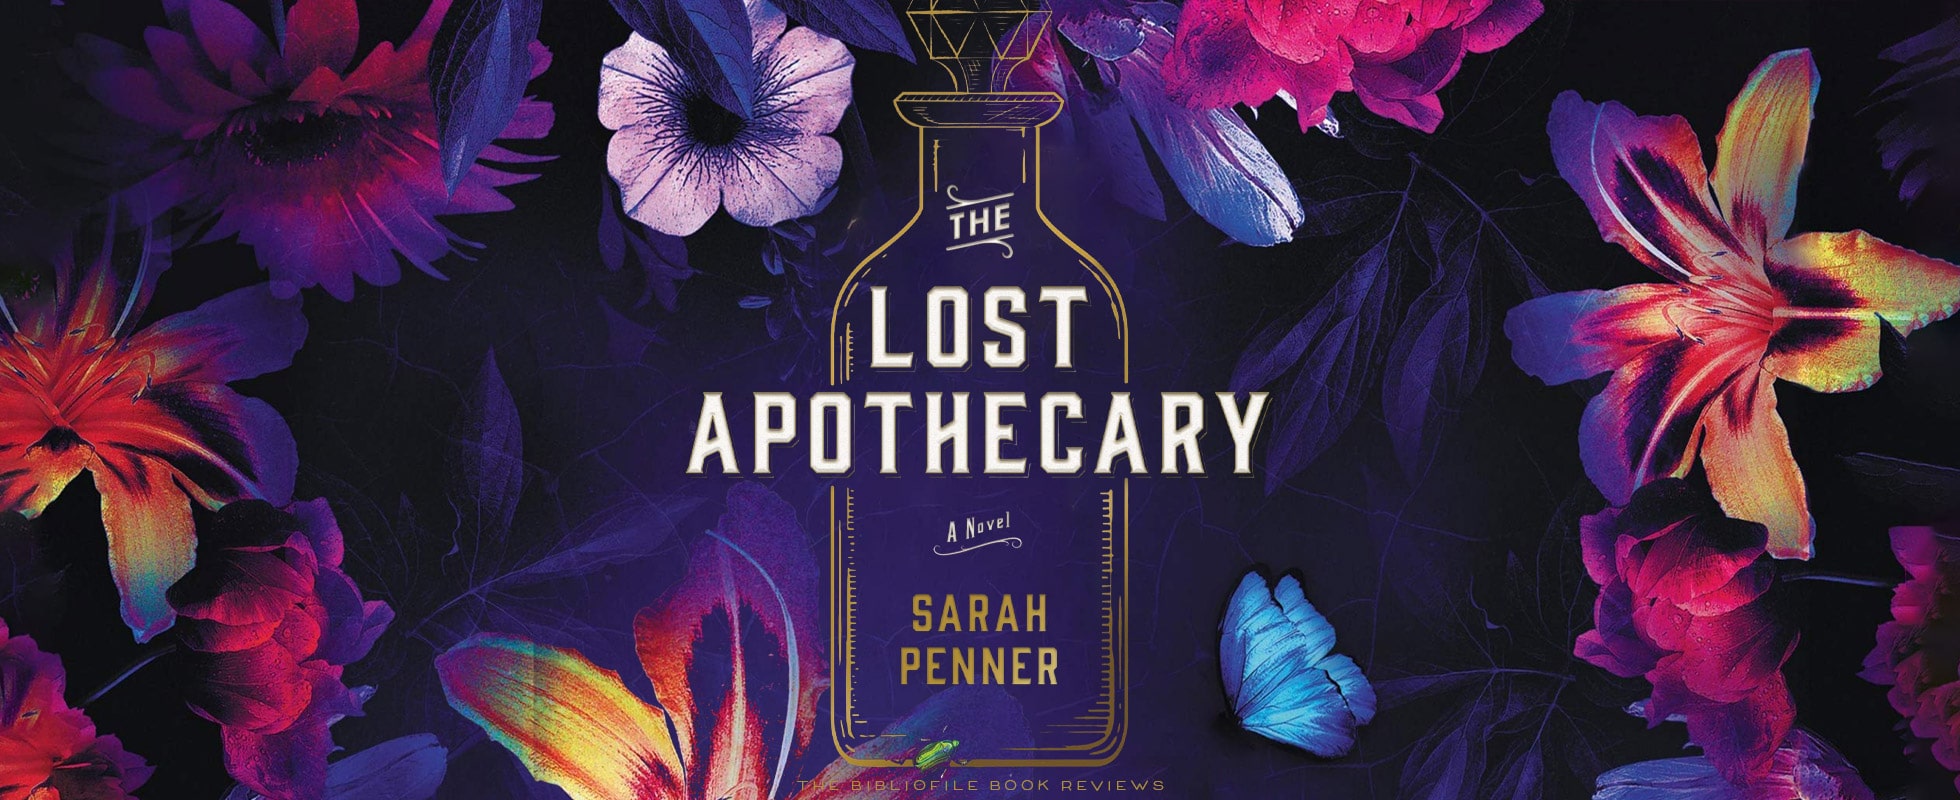 the lost apothecary by sarah penner review summary recap spoilers